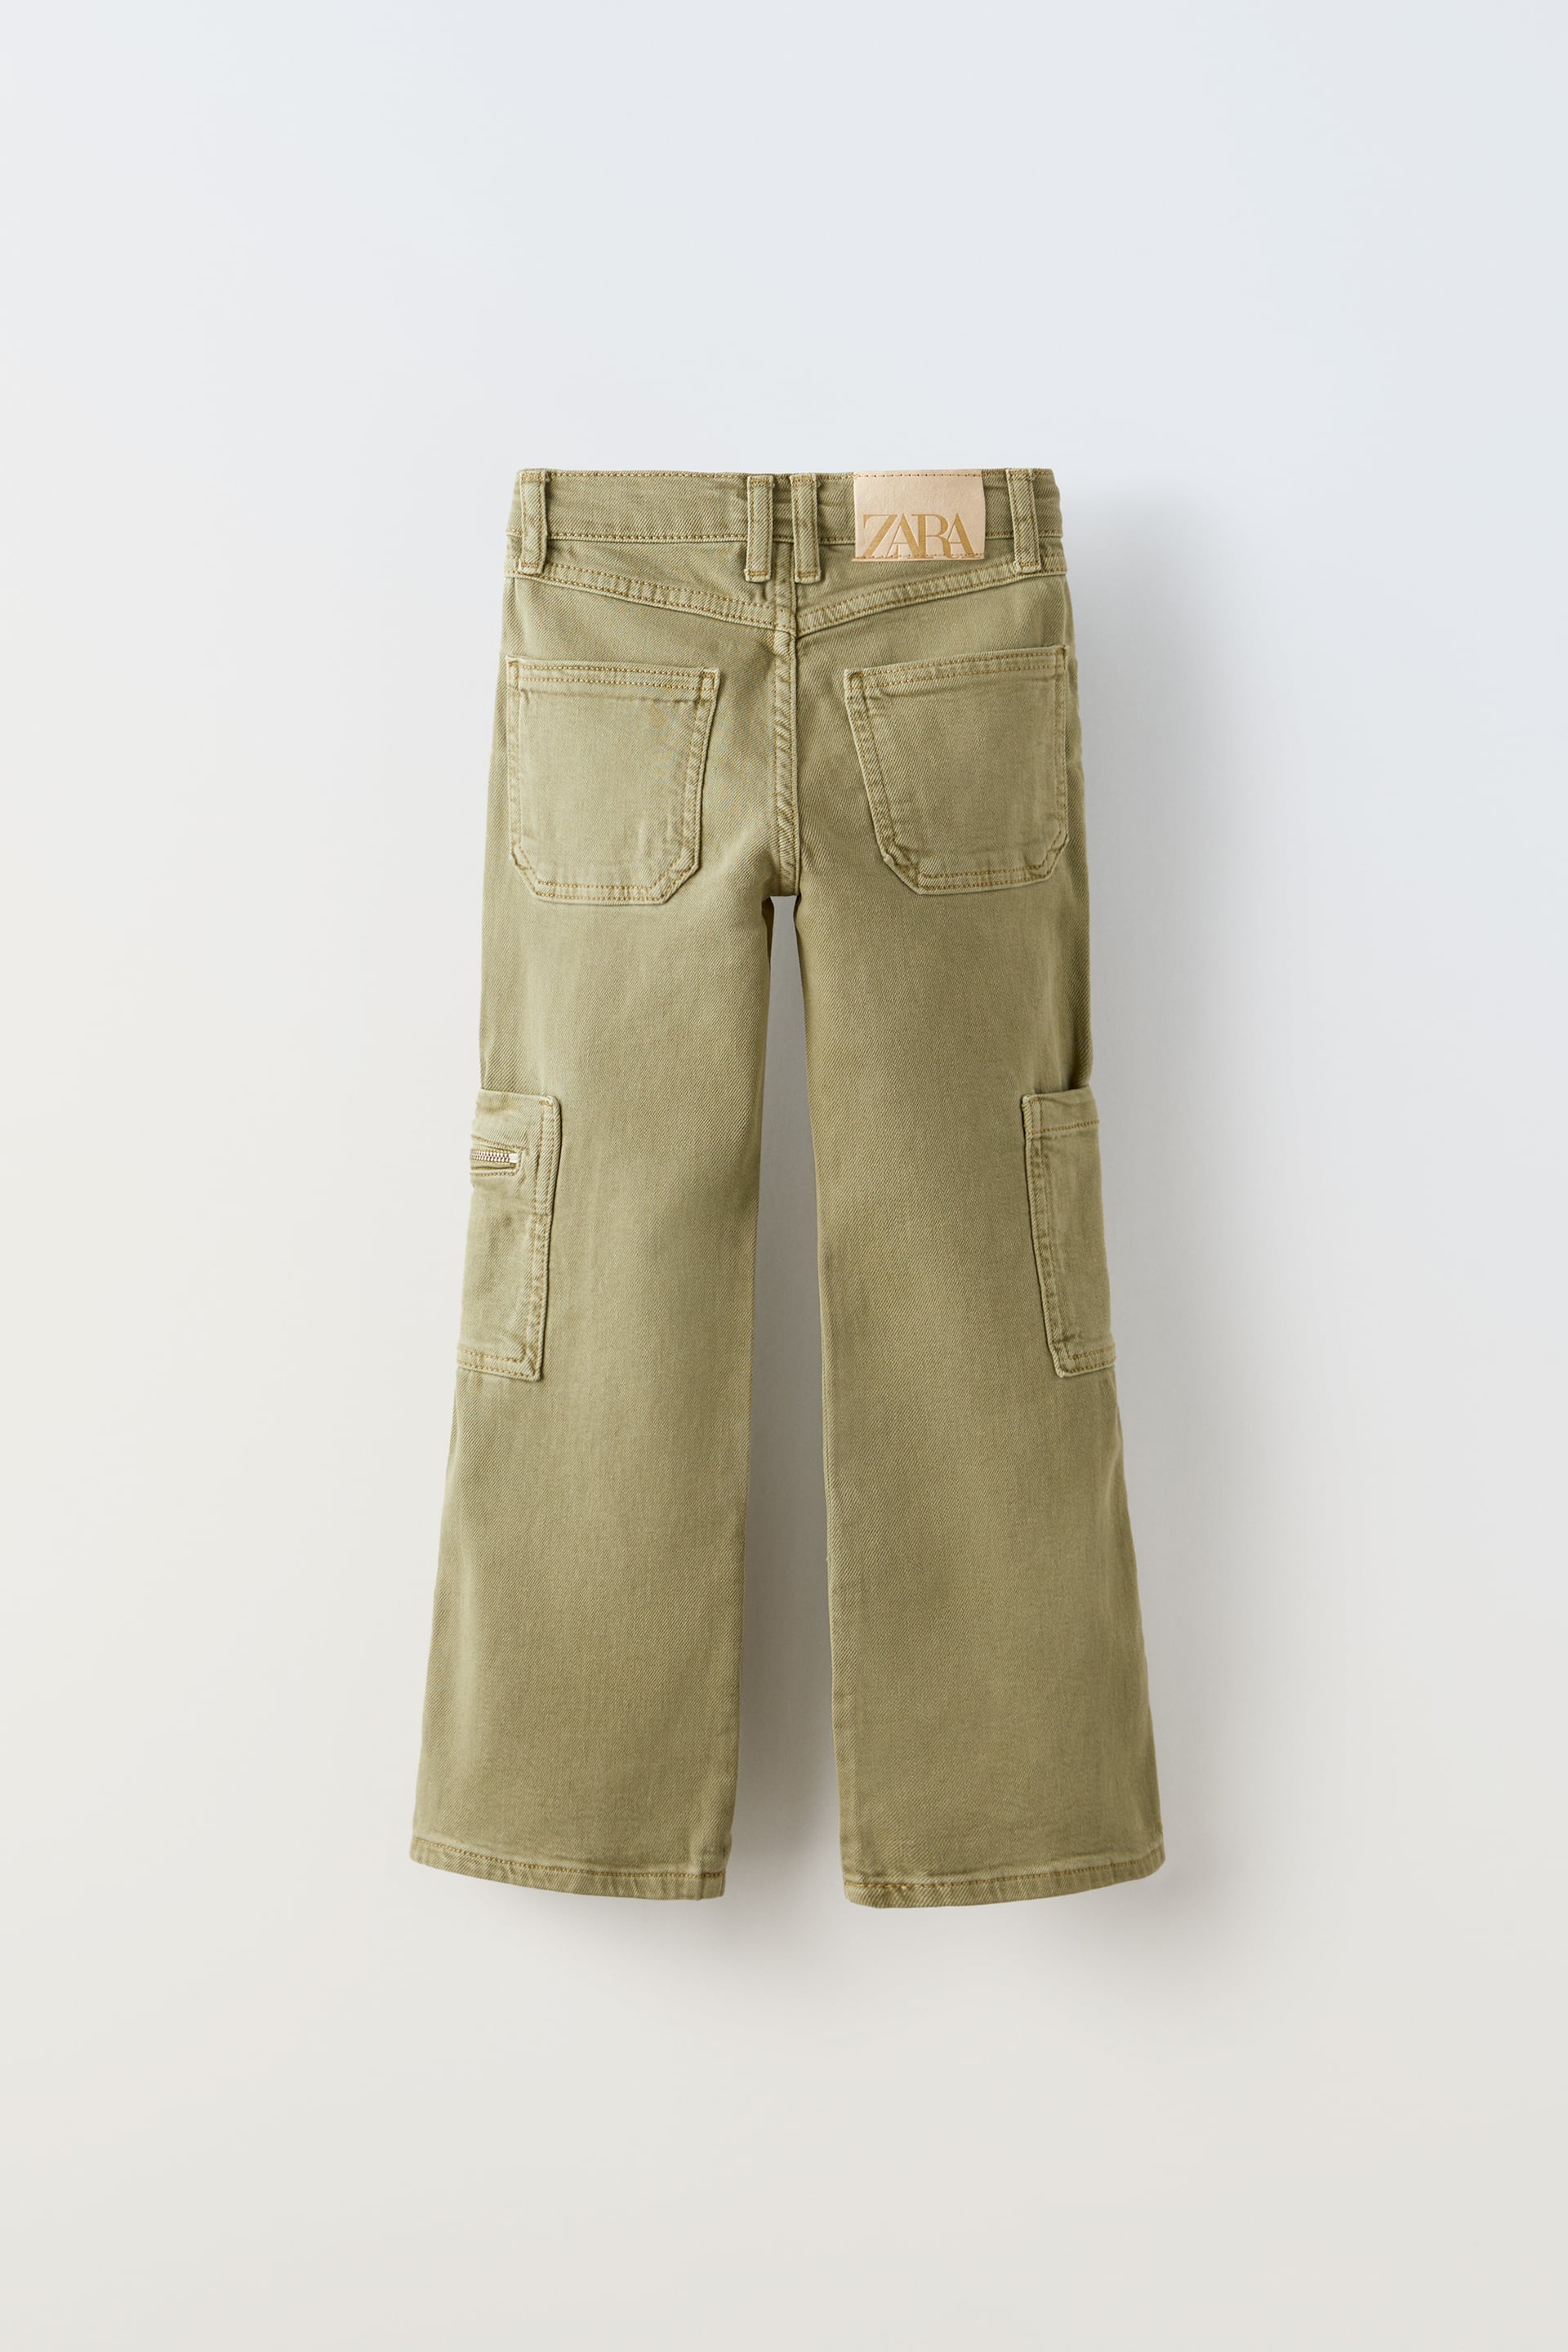 THE NEW CARGO JEANS